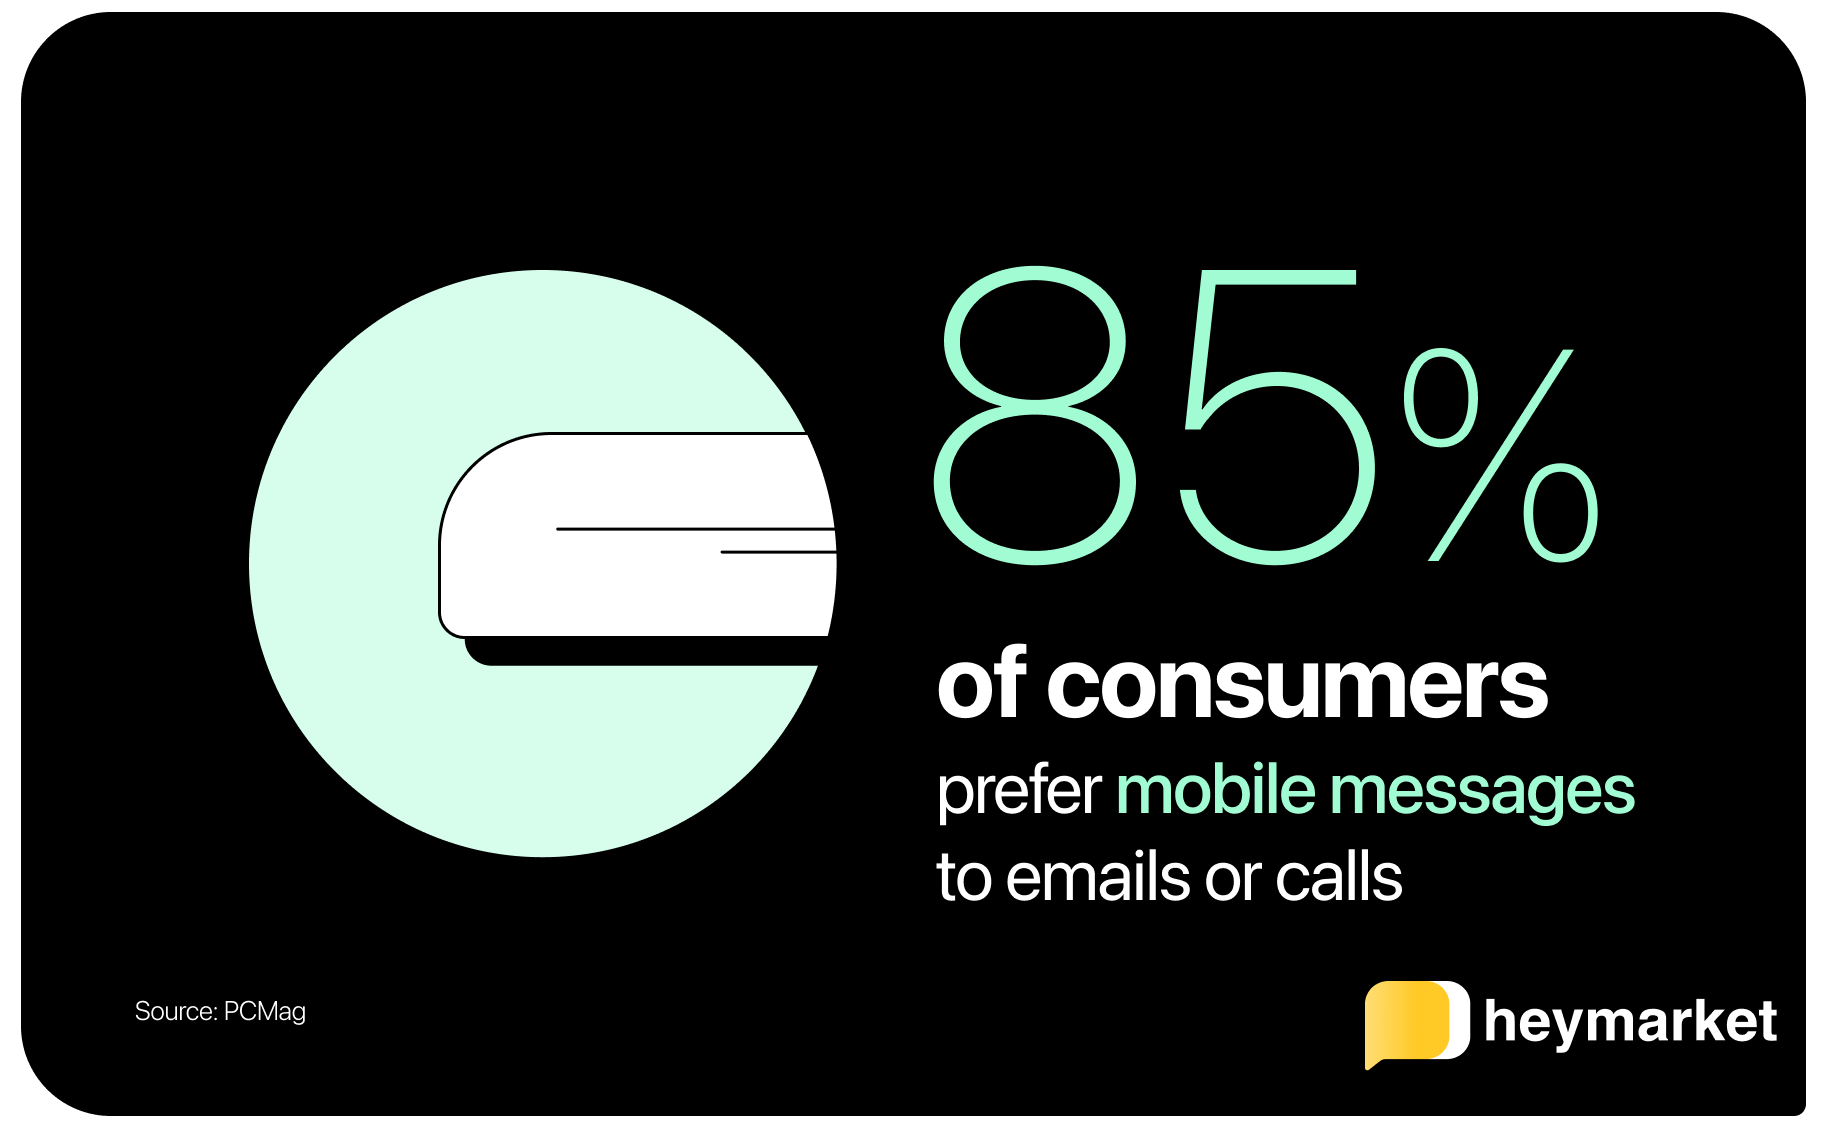 85% of consumers prefer mobile messages to emails or calls